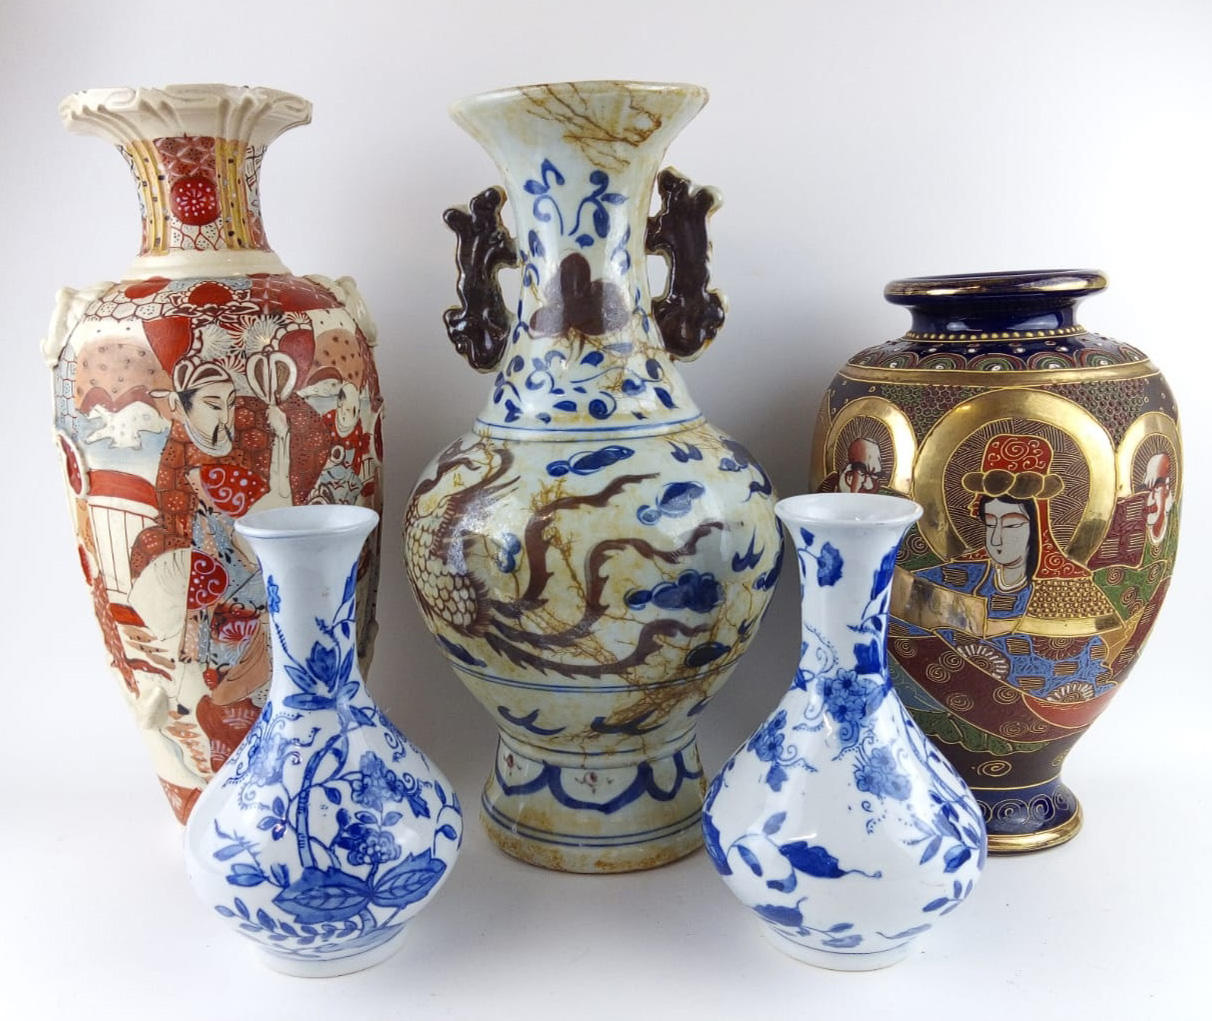 A COLLECTION OF 20TH CENTURY ORIENTAL POTTERY VASES Including a blue and white vase with twin